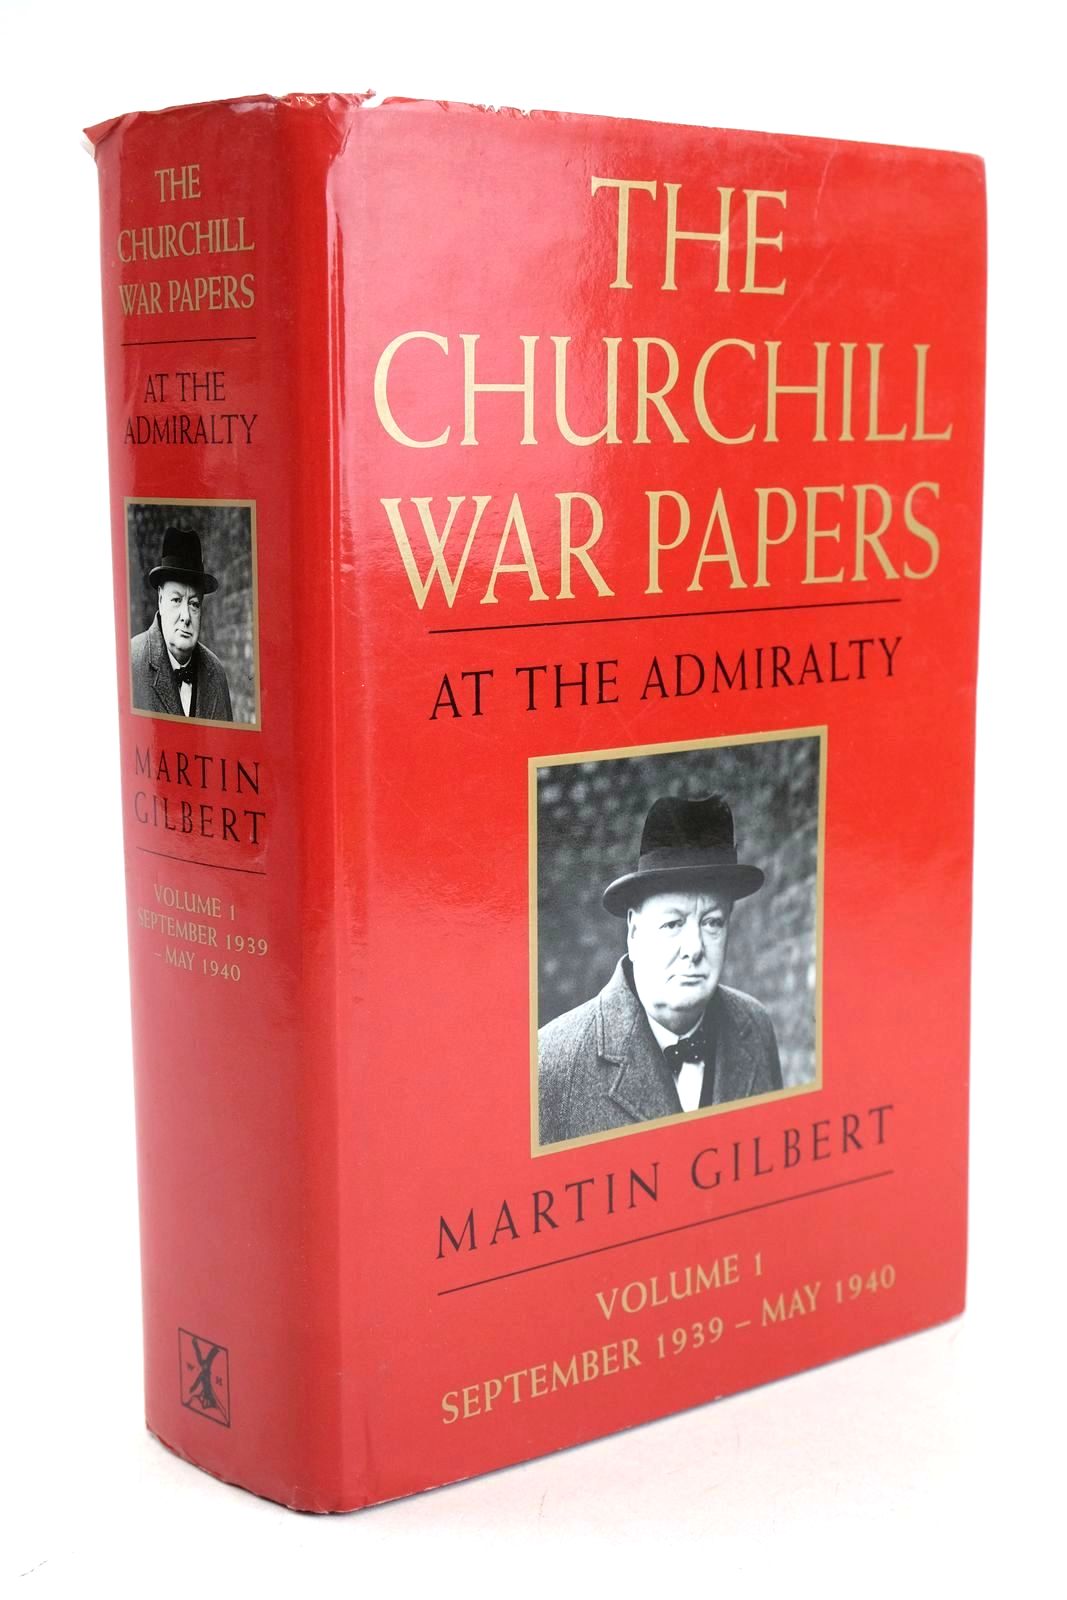 Photo of THE CHURCHILL WAR PAPERS VOLUME I written by Gilbert, Martin Churchill, Winston S. published by Heinemann (STOCK CODE: 1327131)  for sale by Stella & Rose's Books